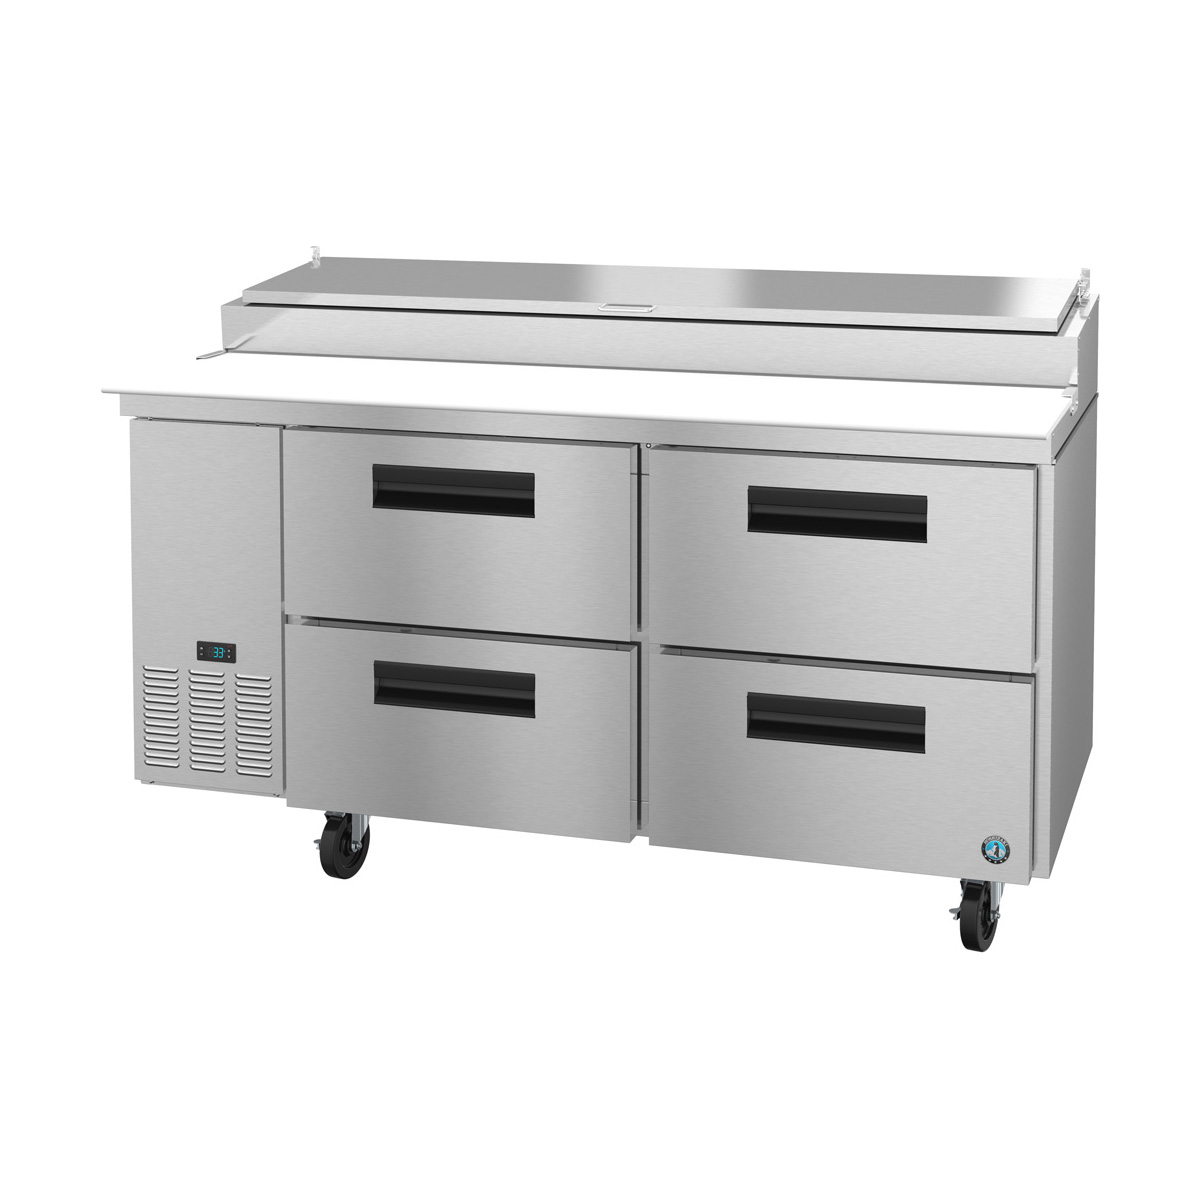 Hoshizaki PR67A-D4 67″ Steelheart Series Two Section Refrigerated Pizza Prep Table, 19.9 cu. ft.